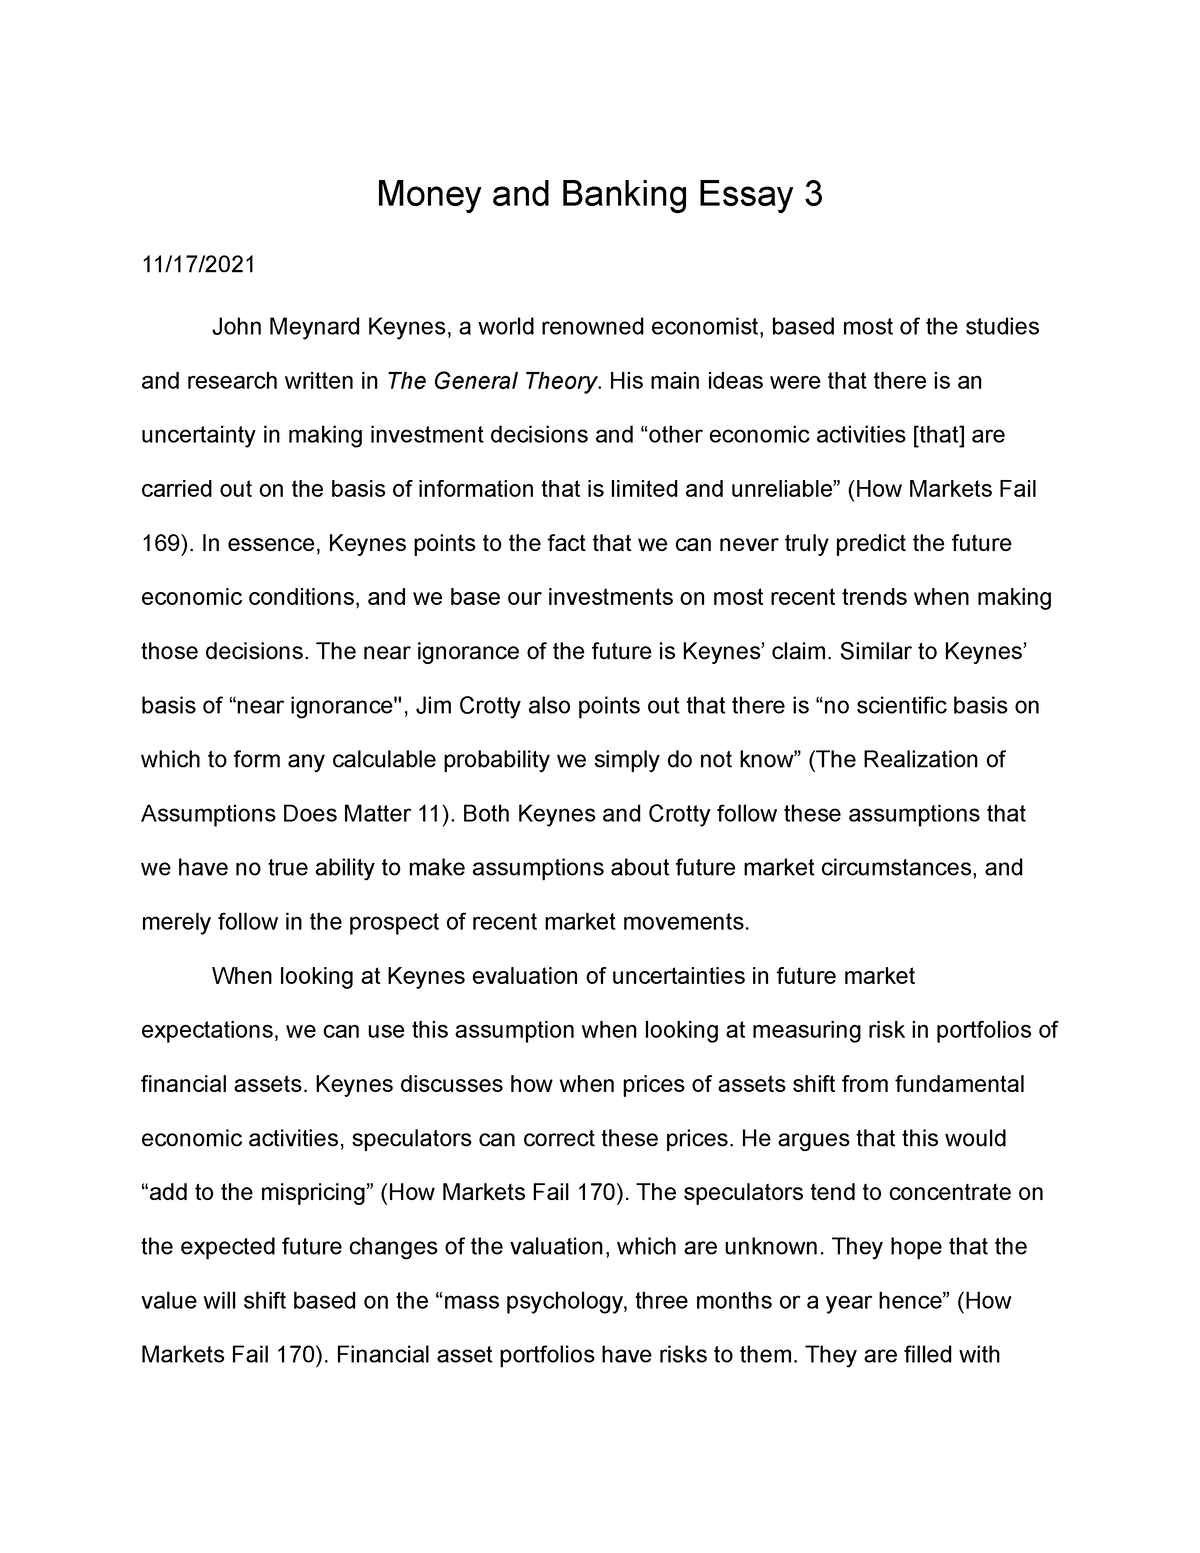 essay on money and banking